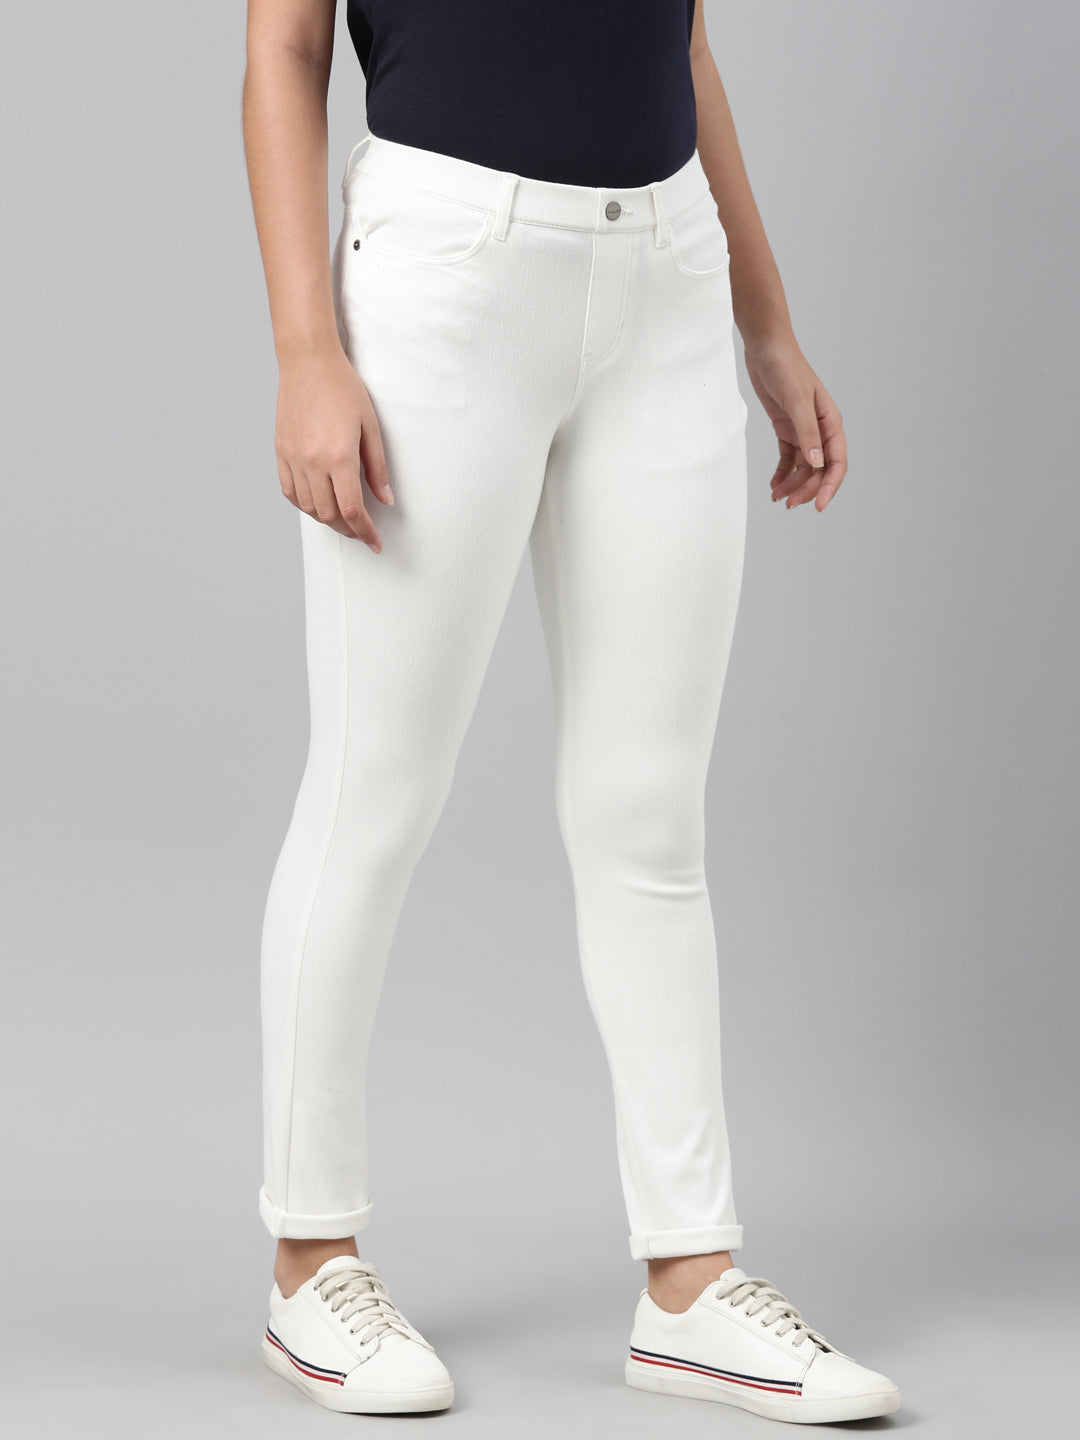 Women Solid Navy Super Stretch Jeggings